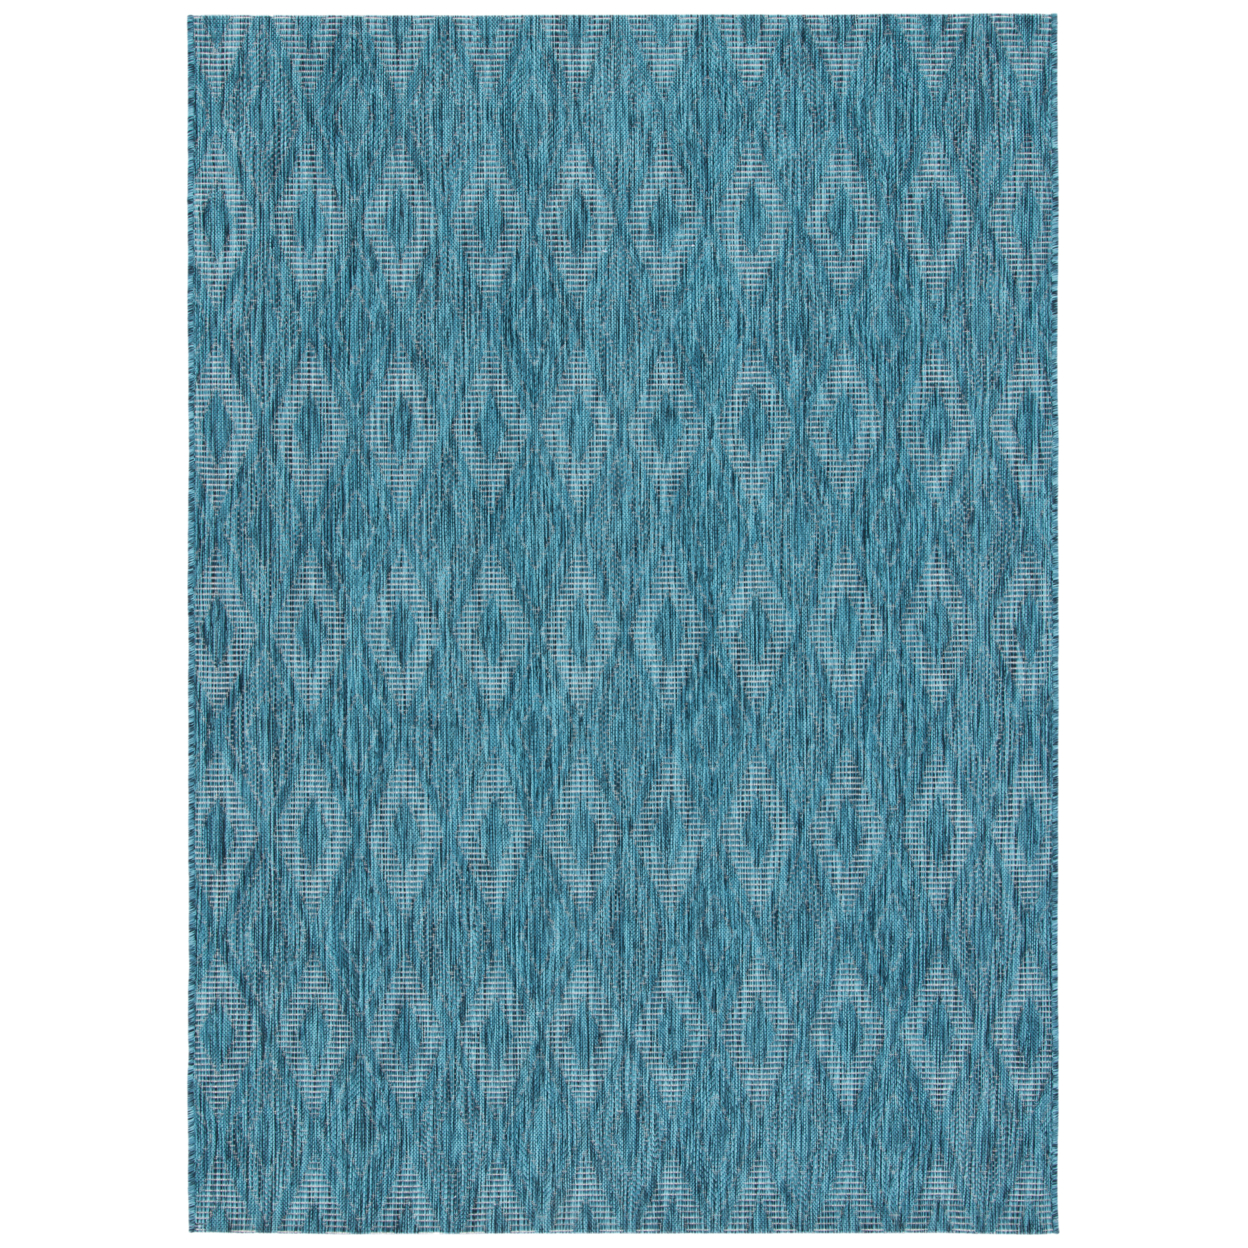 SAFAVIEH Outdoor CY8522-37222 Courtyard Turquoise / Blue Rug - 4' X 5' 7